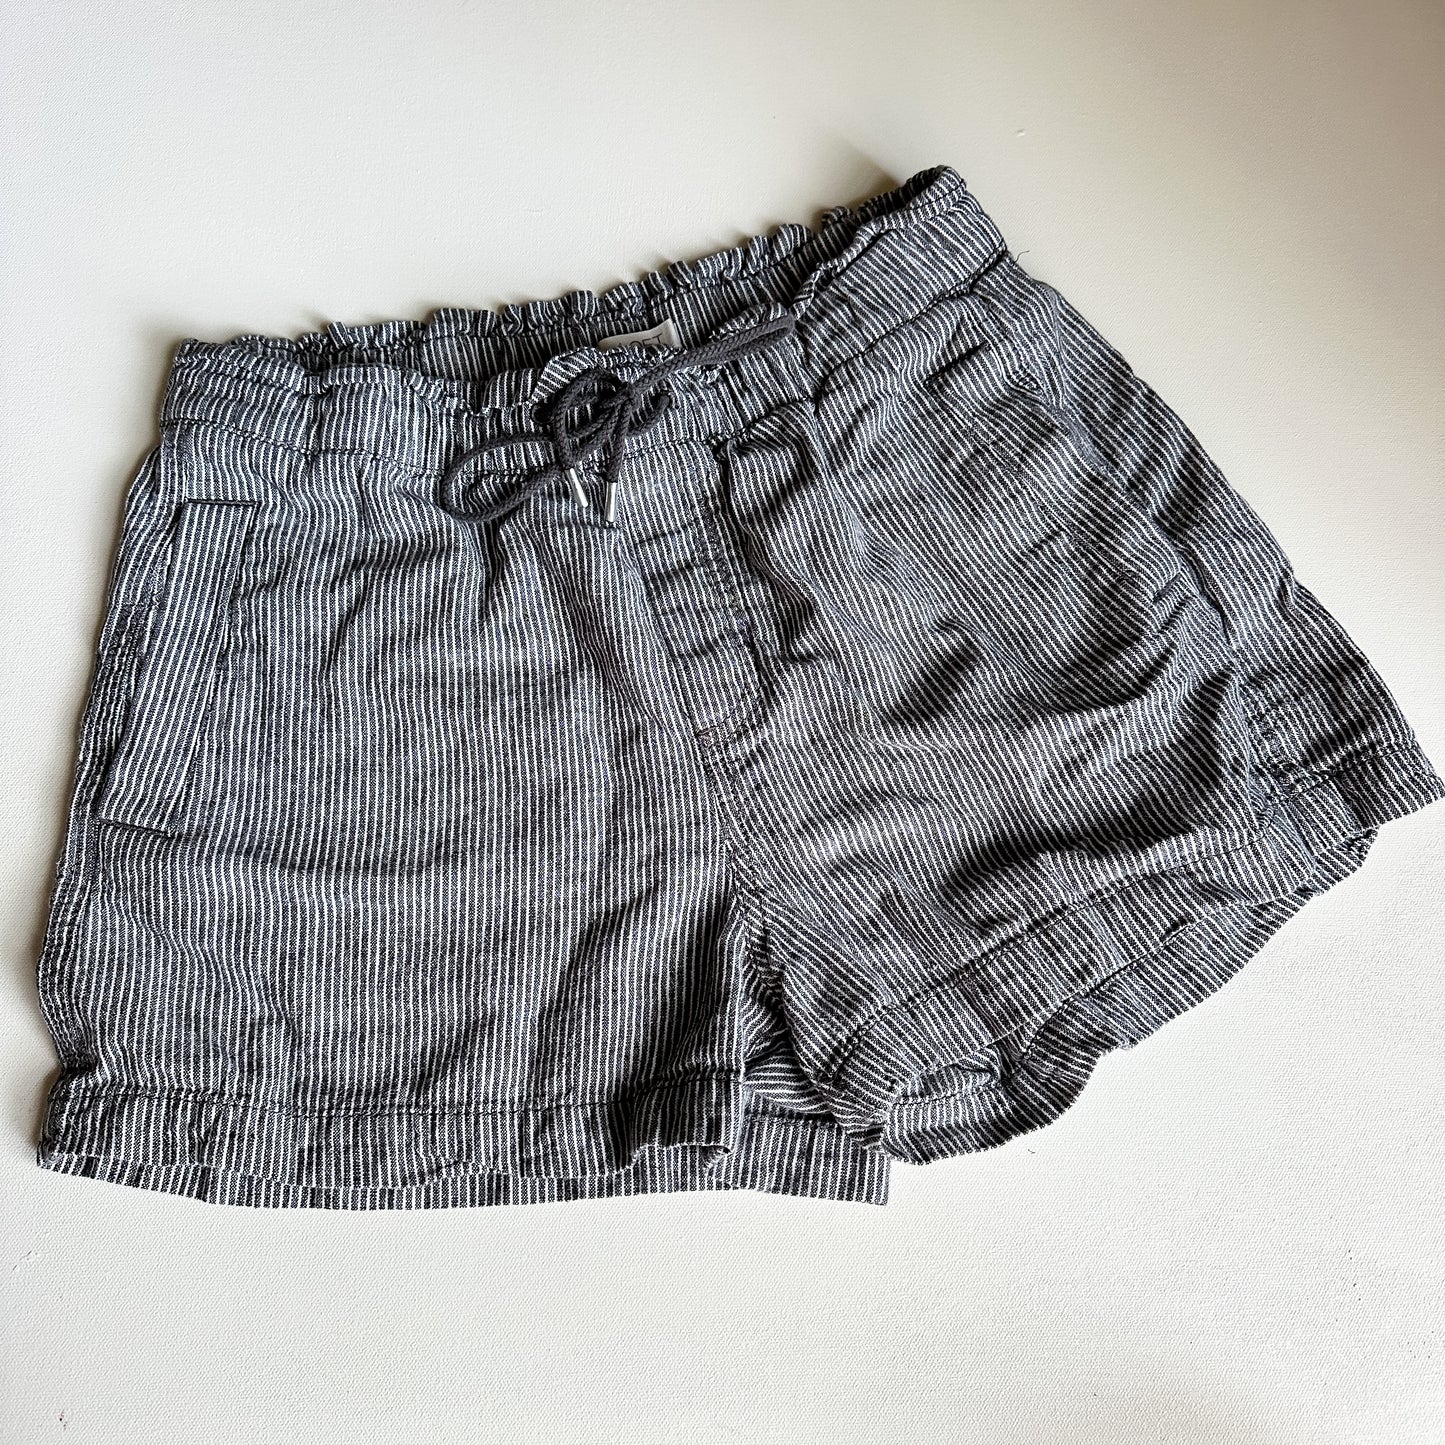 Loft Striped Cotton/Linen Pull-on Shorts (size Small)